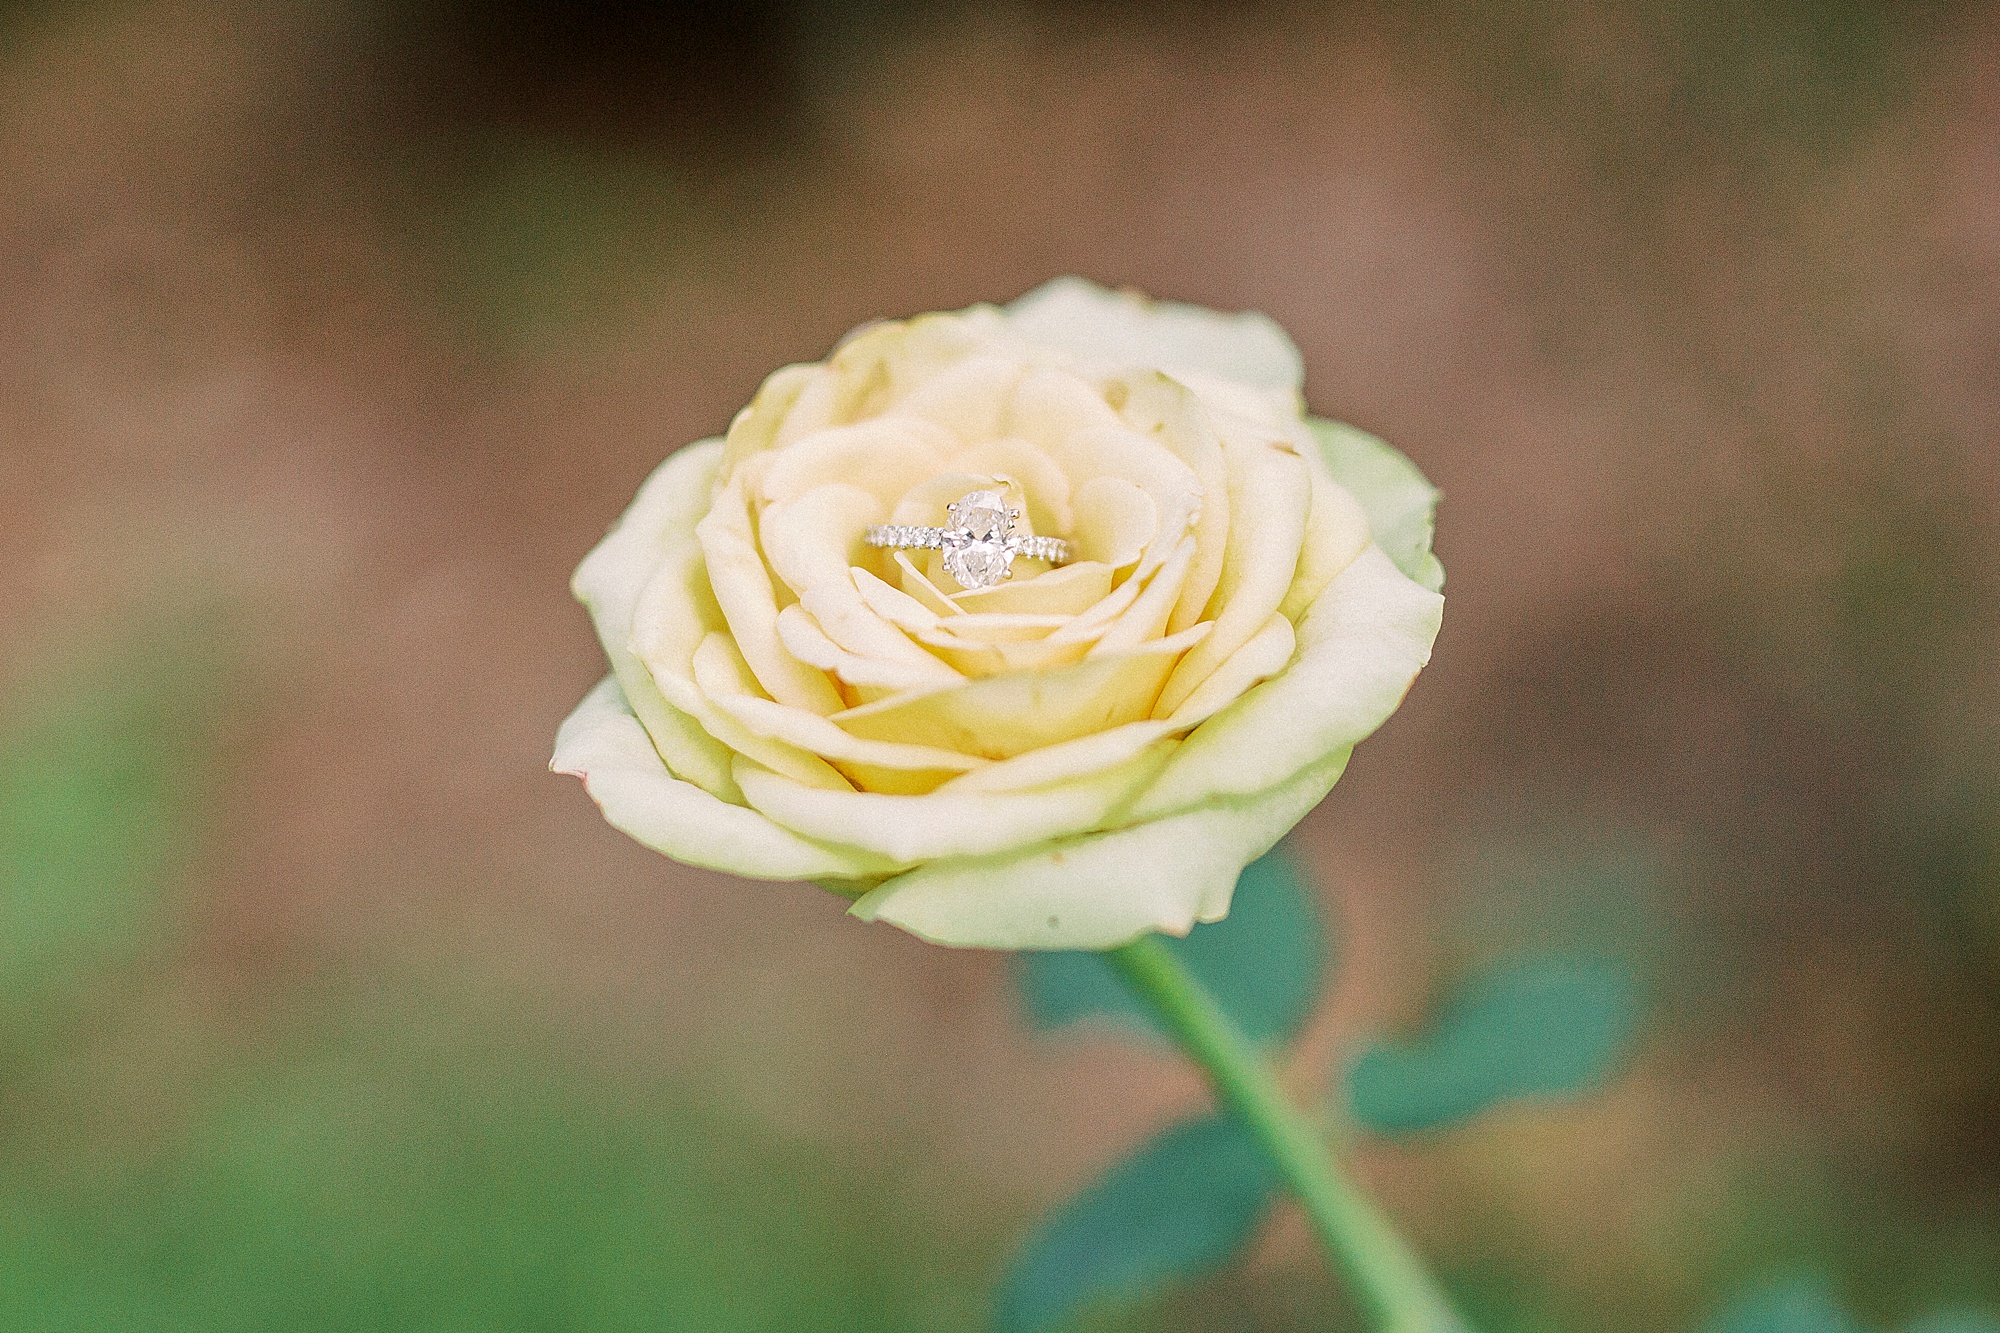 diamond ring sits in yellow rose